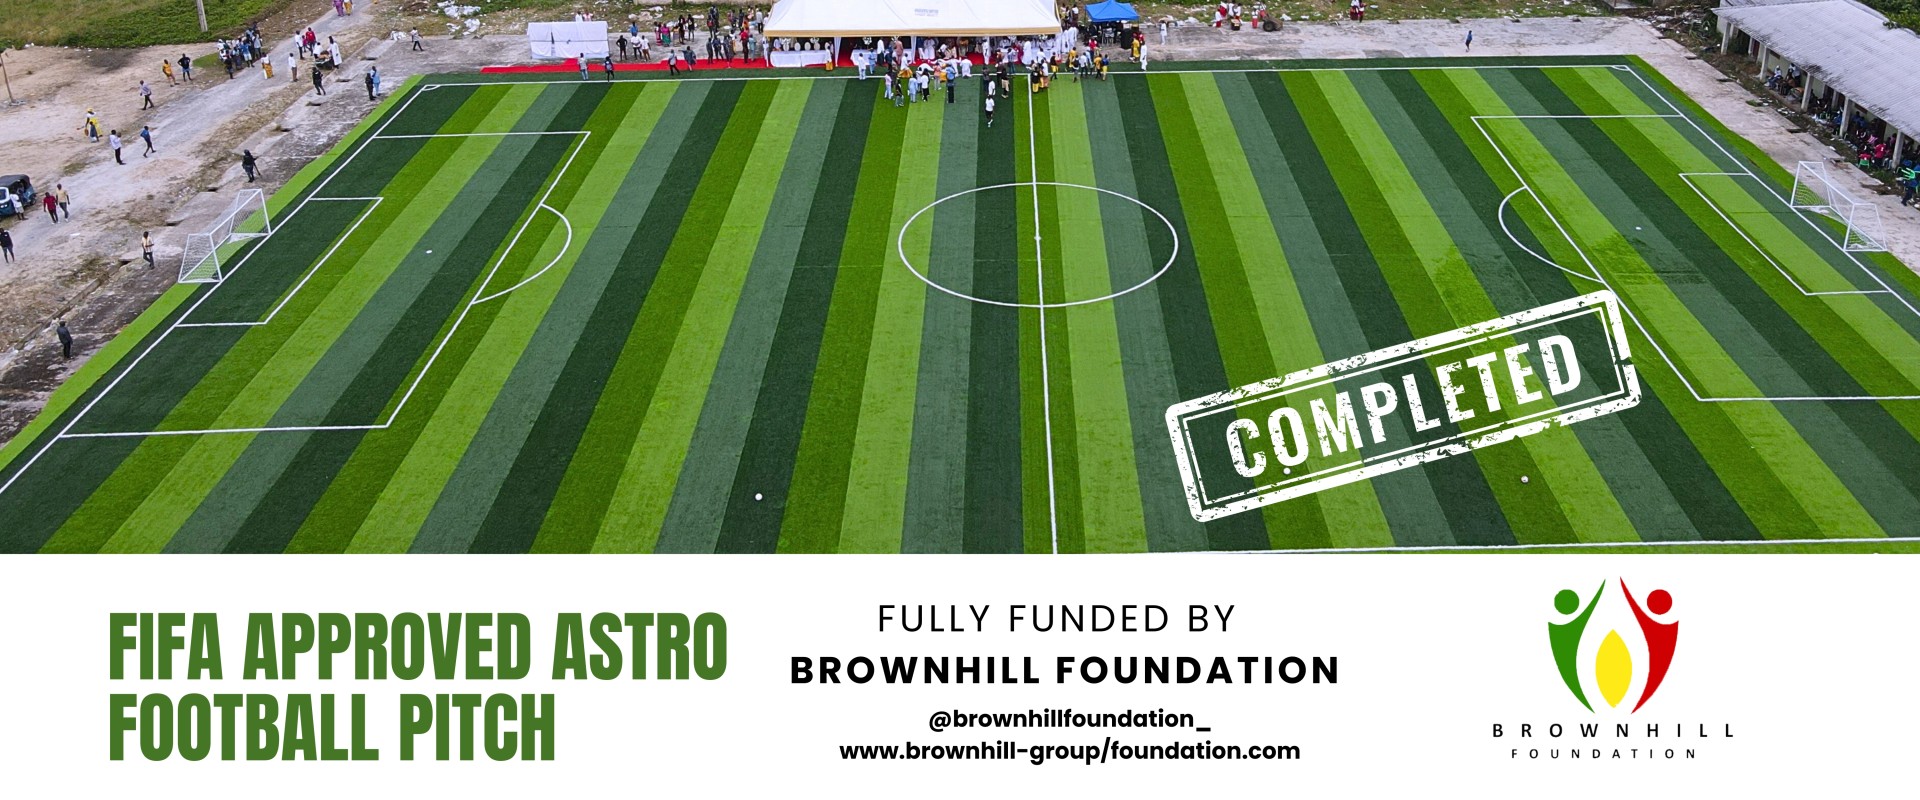 BROWNHILL FOUNDATION DONATES FIFA-APPROVED ASTRO TURF FOOTBALL PITCH AND EVENT INFRASTRUCTURE TO EREJUWA GRAMMAR SCHOOL, ODE-ITSEKIRI, DELTA STATE, NIGERIA.